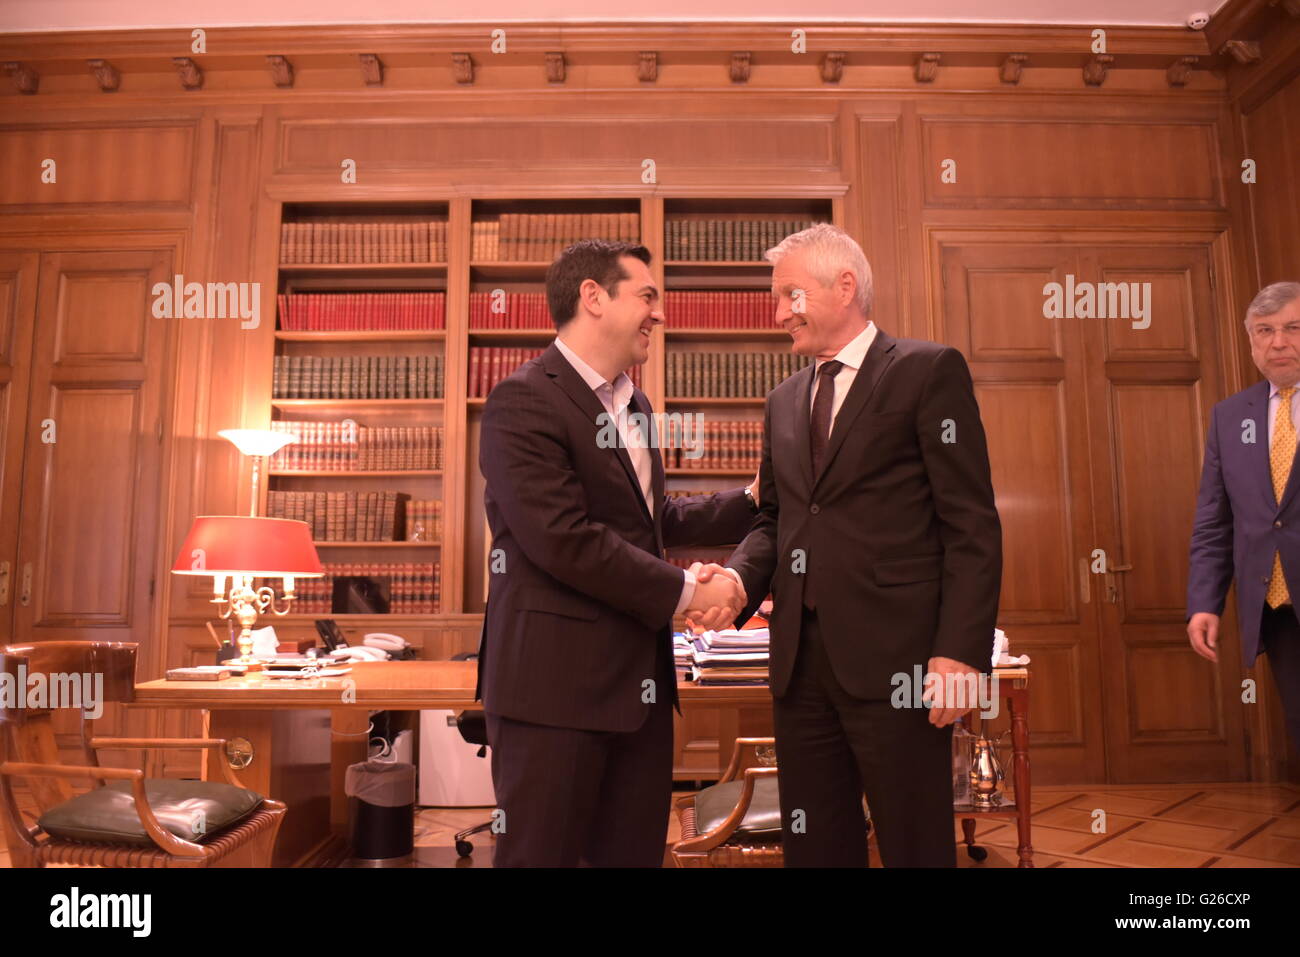 Handshake between Greek Prime Minister Mr. Alexis Tsipras (left) and  General Secretary of Council of Europe, Mr. Thorbjorn Jagland (right) (Photo by Dimitrios Karvountzis/Pacific Press) Stock Photo